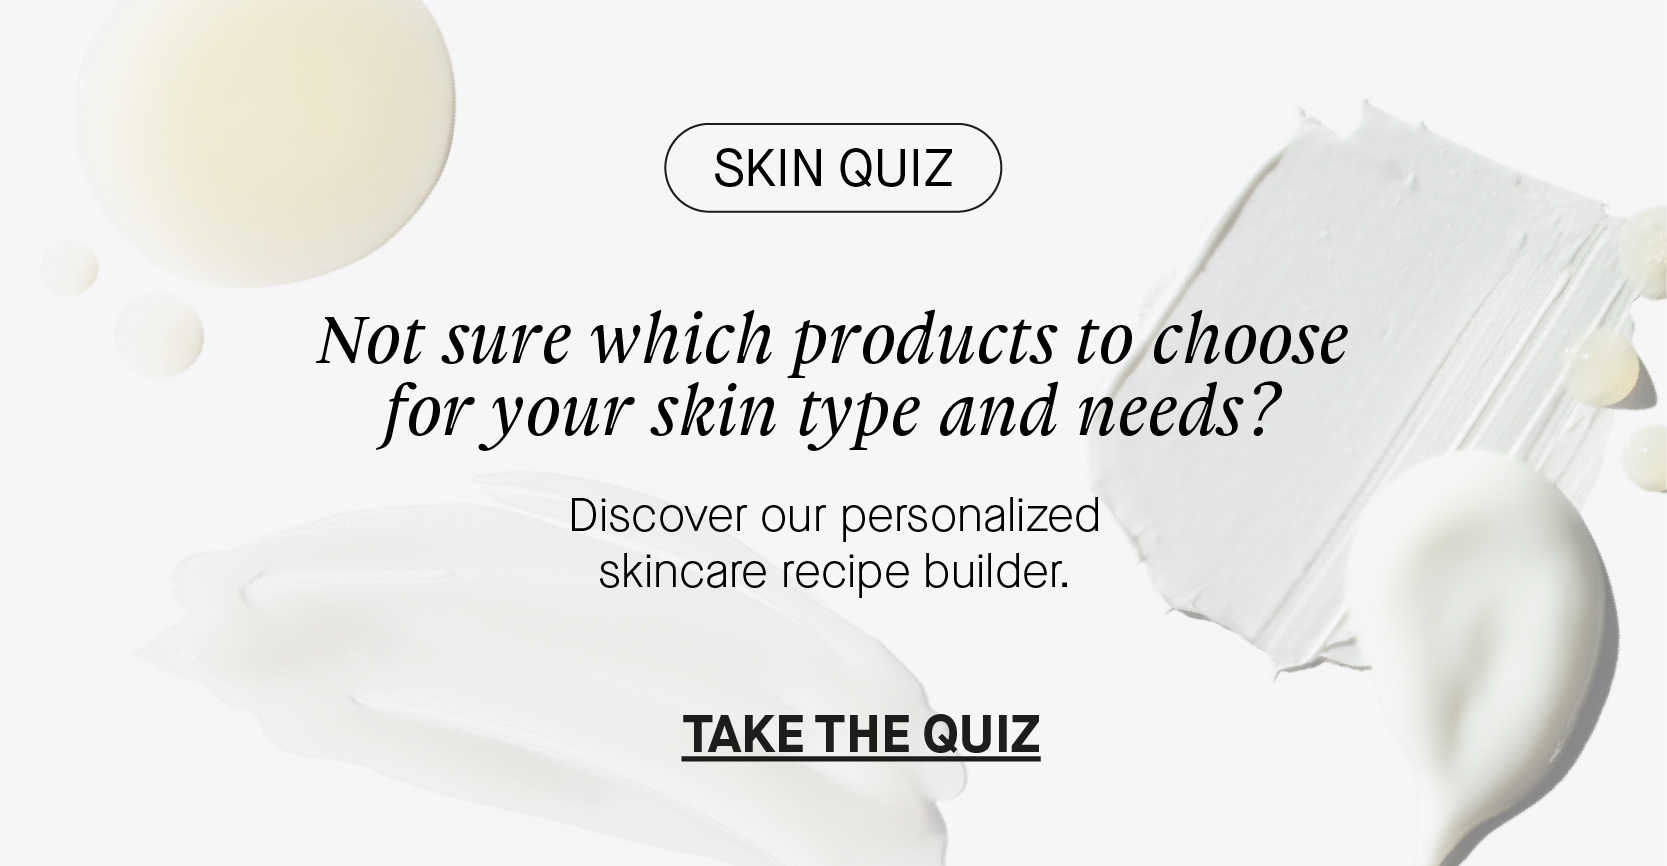 SKIN QUIZ Not sure which products to choose for your skin type and needs? Discover our personalized skincare recipe builder. TAKE THE QUIZ 